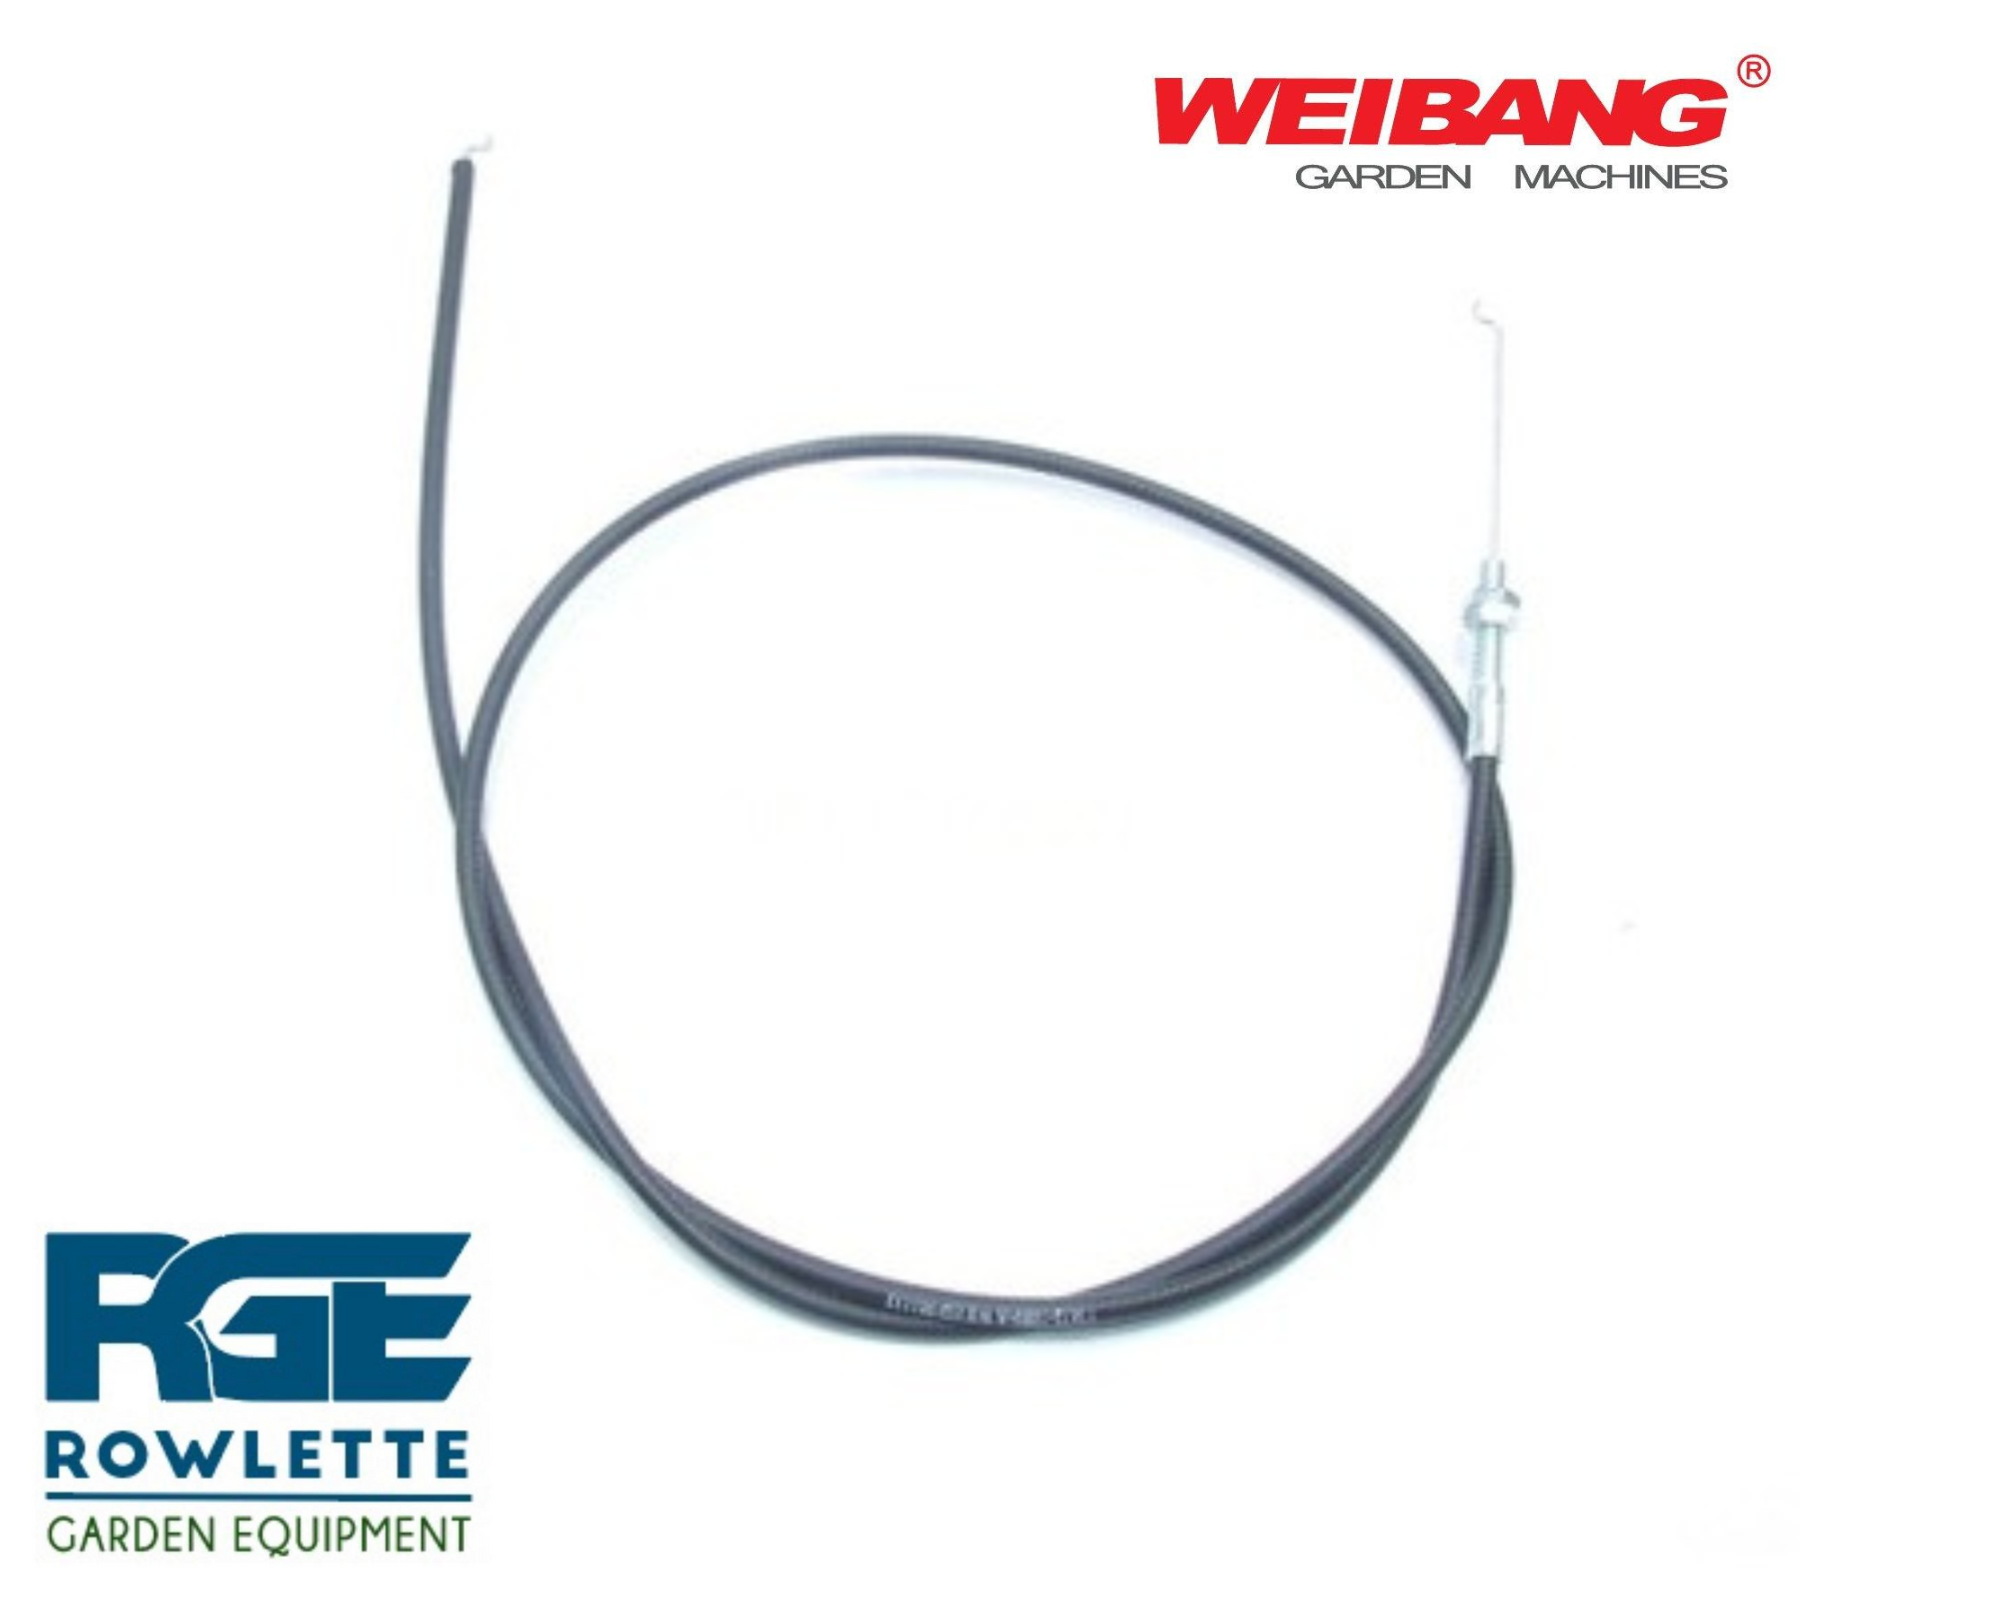 Genuine Weibang Throttle Cable Fits models WB466SC